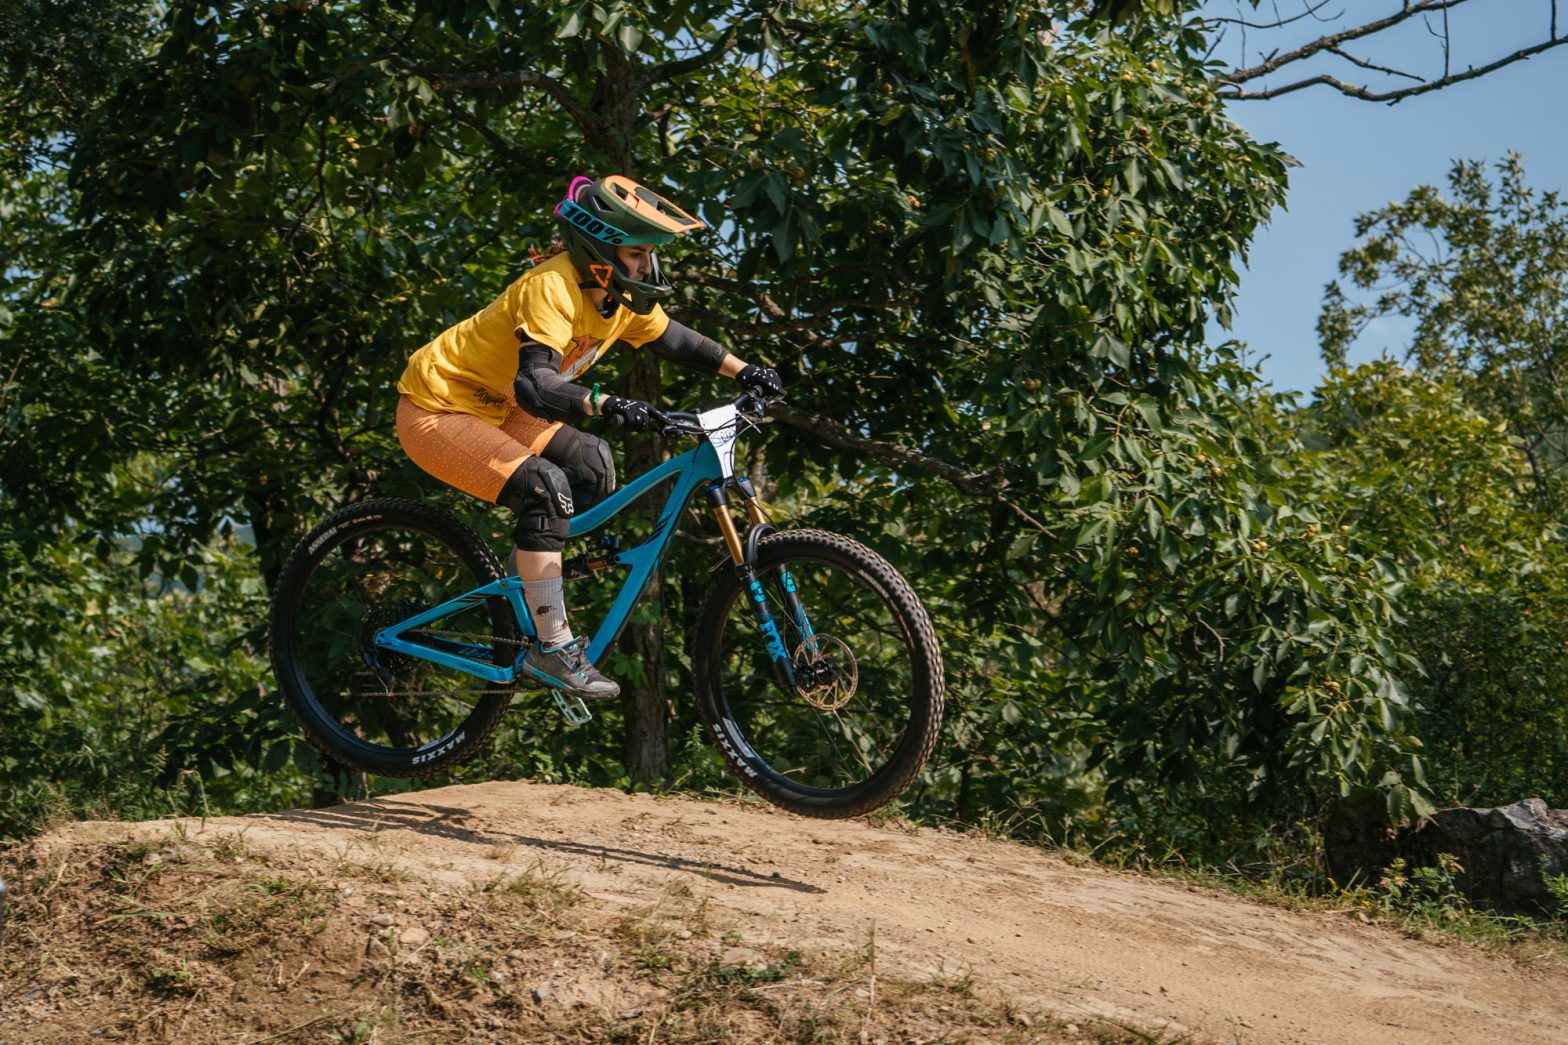 Action shot from the Mountain Creek Bike Park in Vernon New Jersey